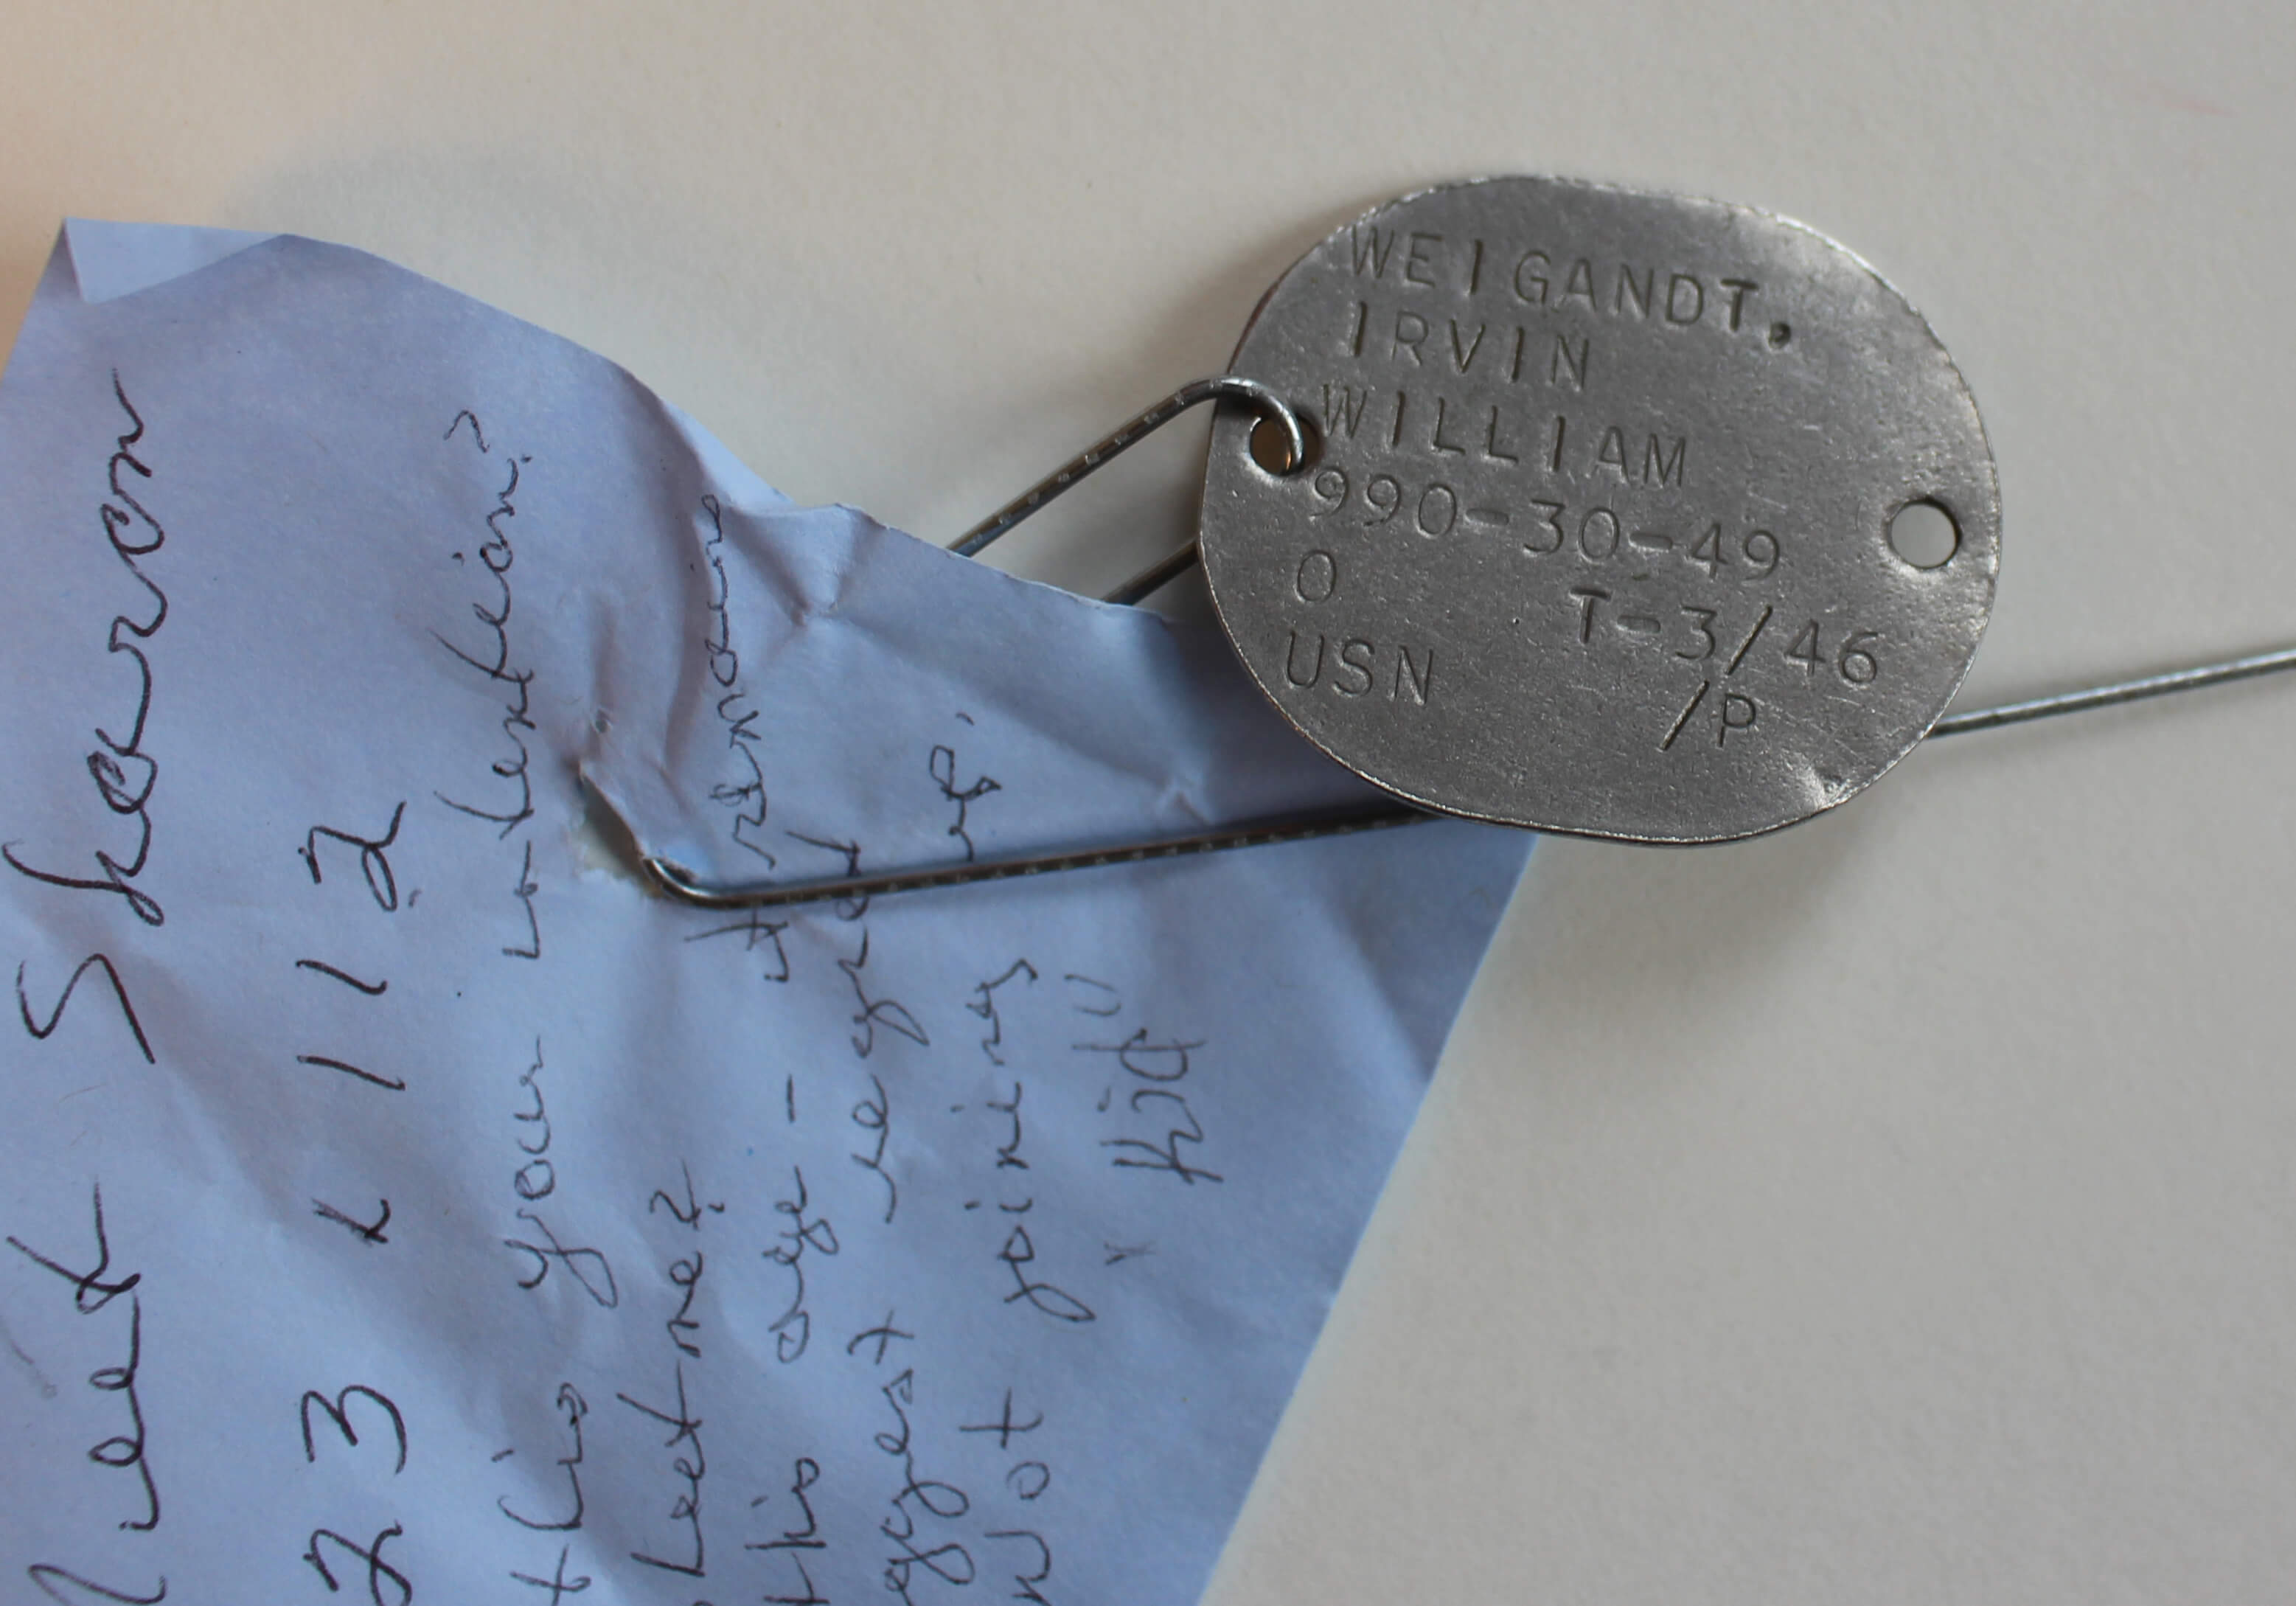 Note and dog tag for Dad, from "kid"